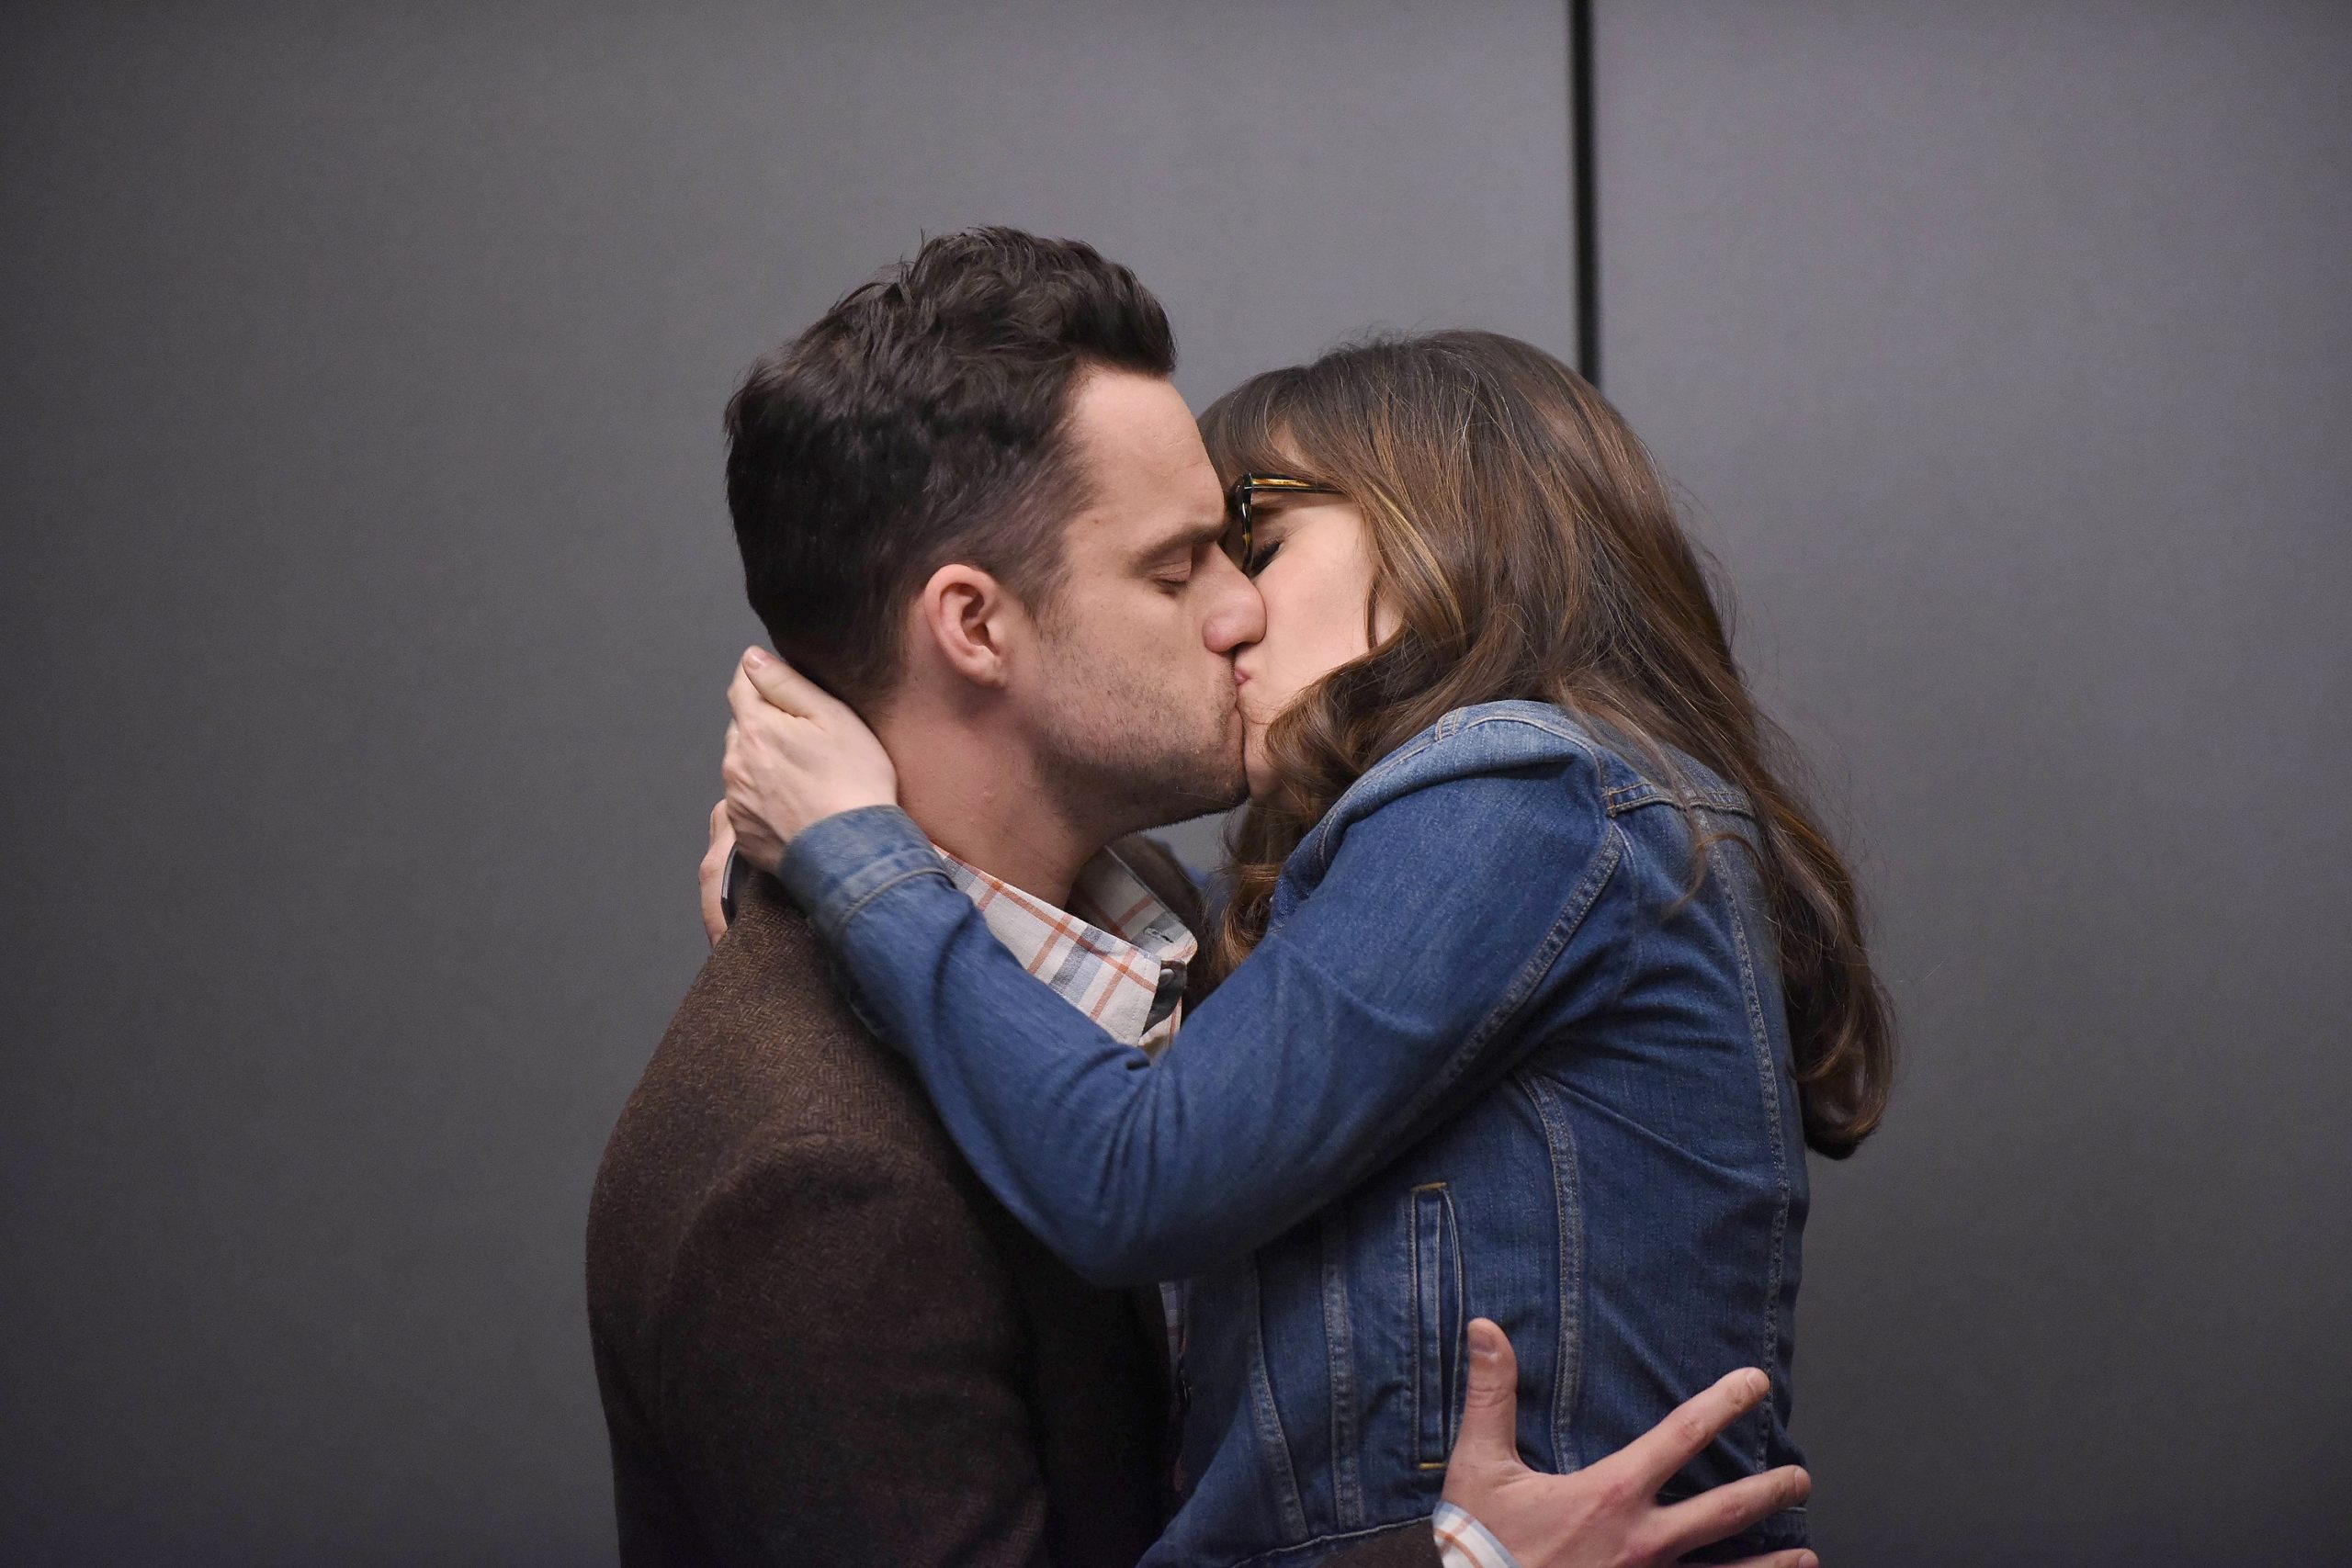 ‘New Girl’: Jess Day Described Nick Miller When Describing Her Prefered Type of Man in Season 1